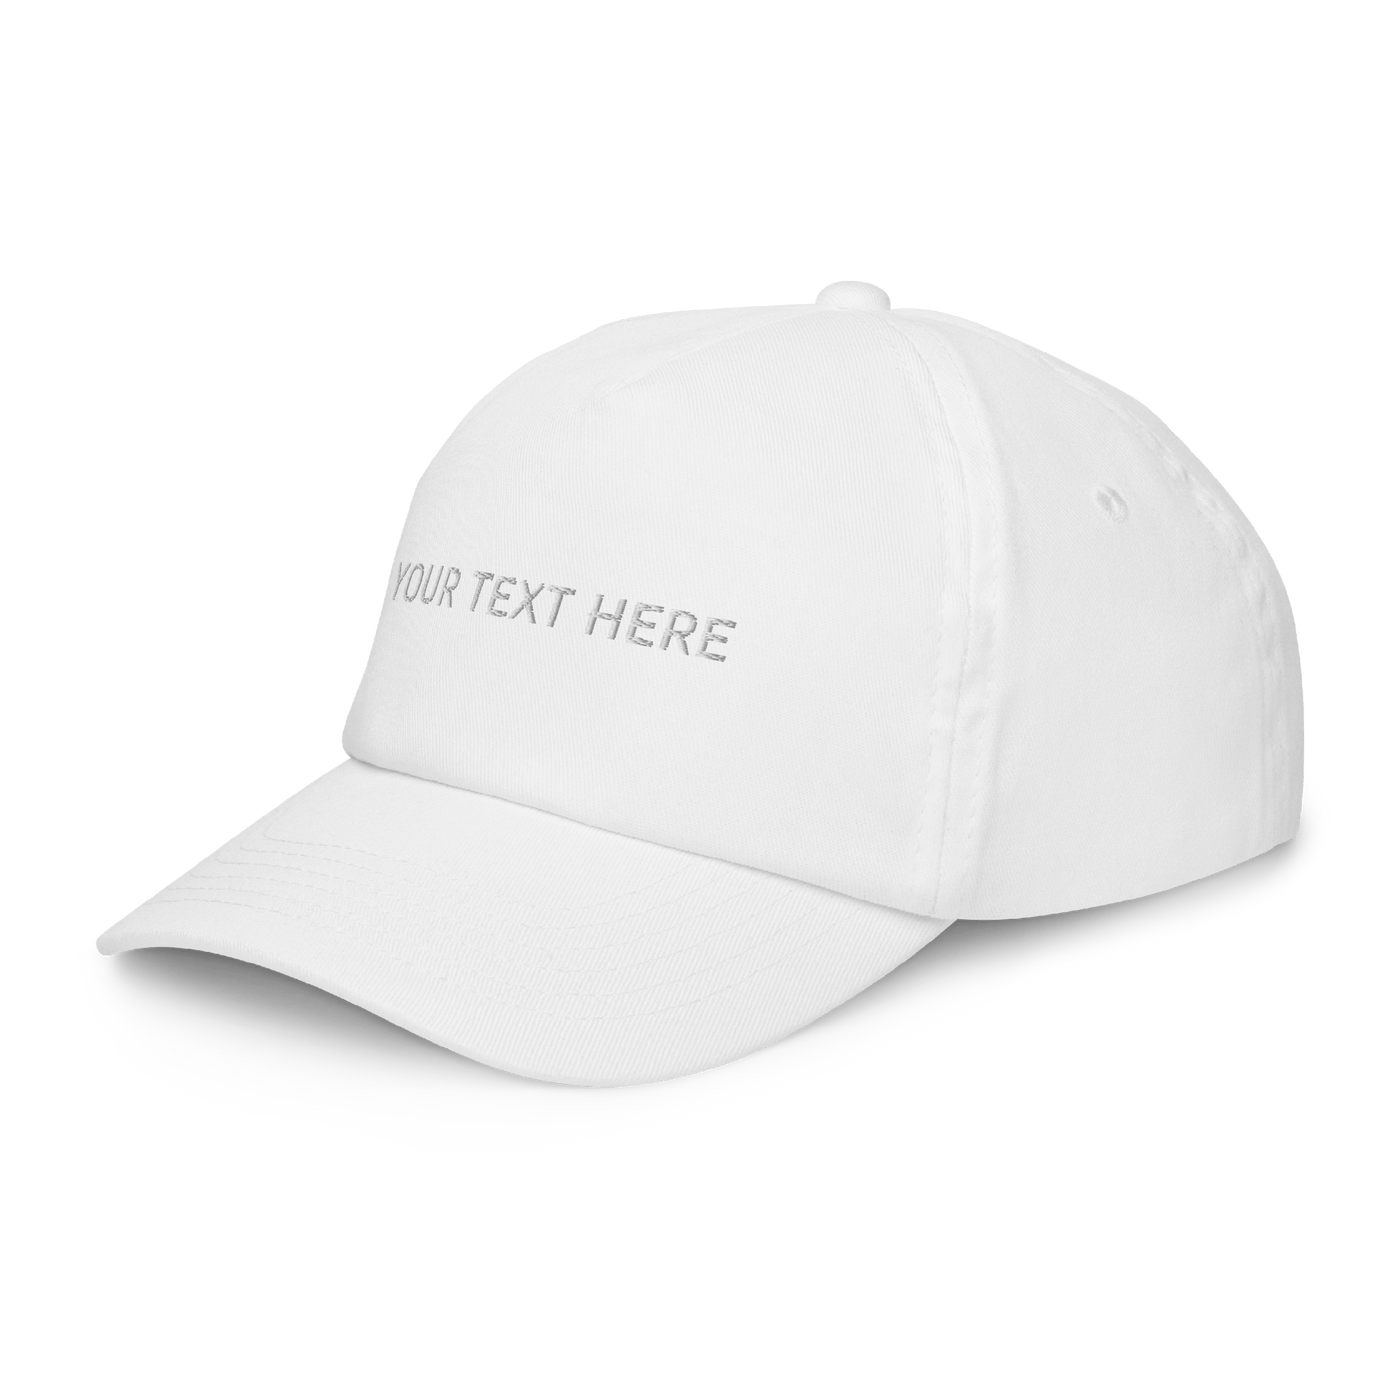 Personalize a Kids cap - White - - Just Another Cap Store